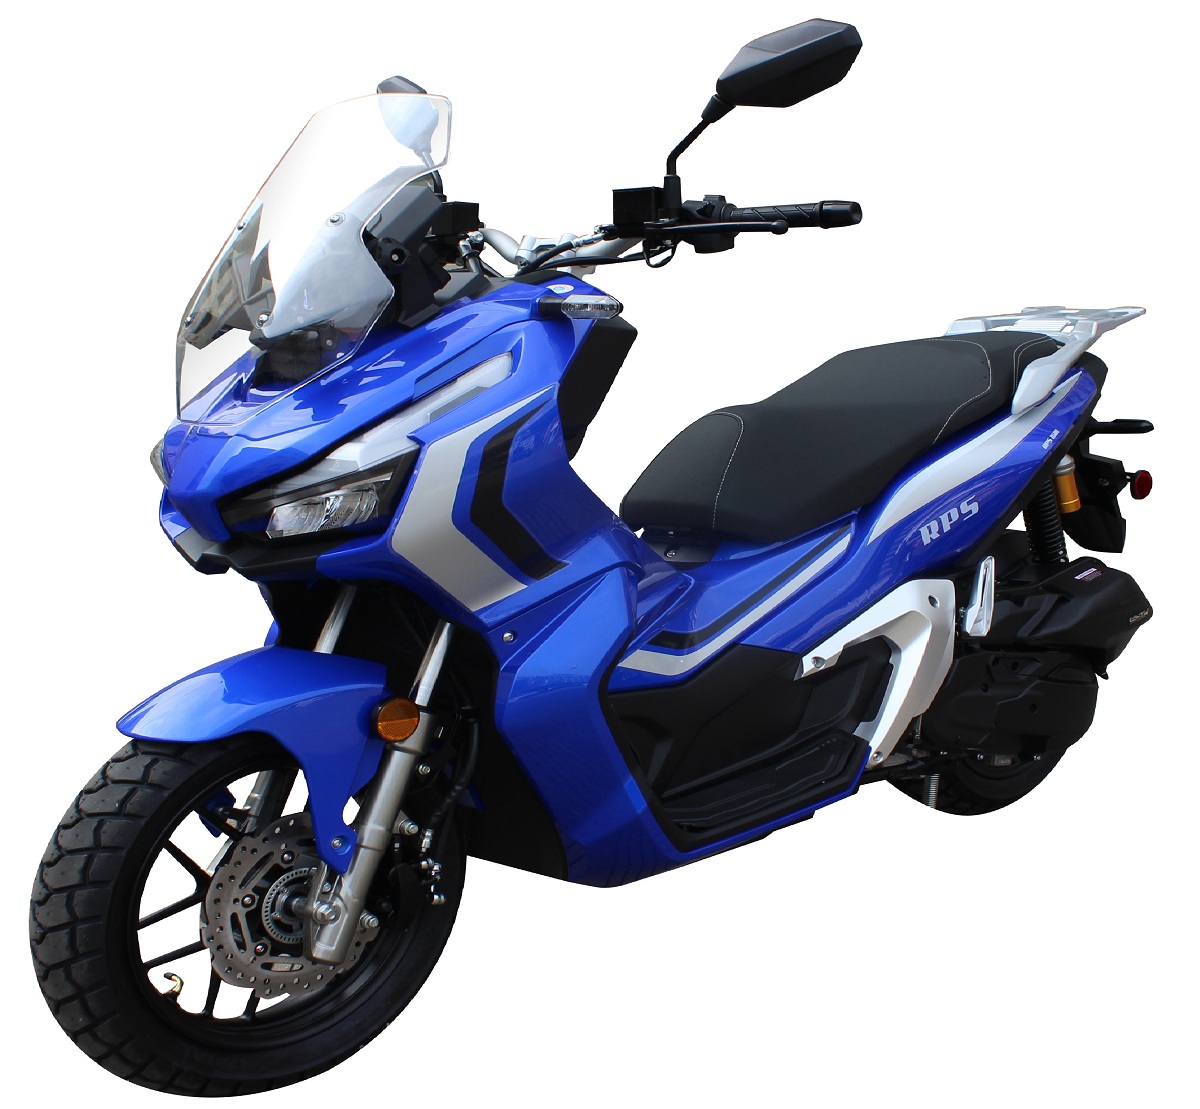 RPS ADV 150 Large Body Scooter 150Cc GY6 Motor Digital Speedometer - Blue